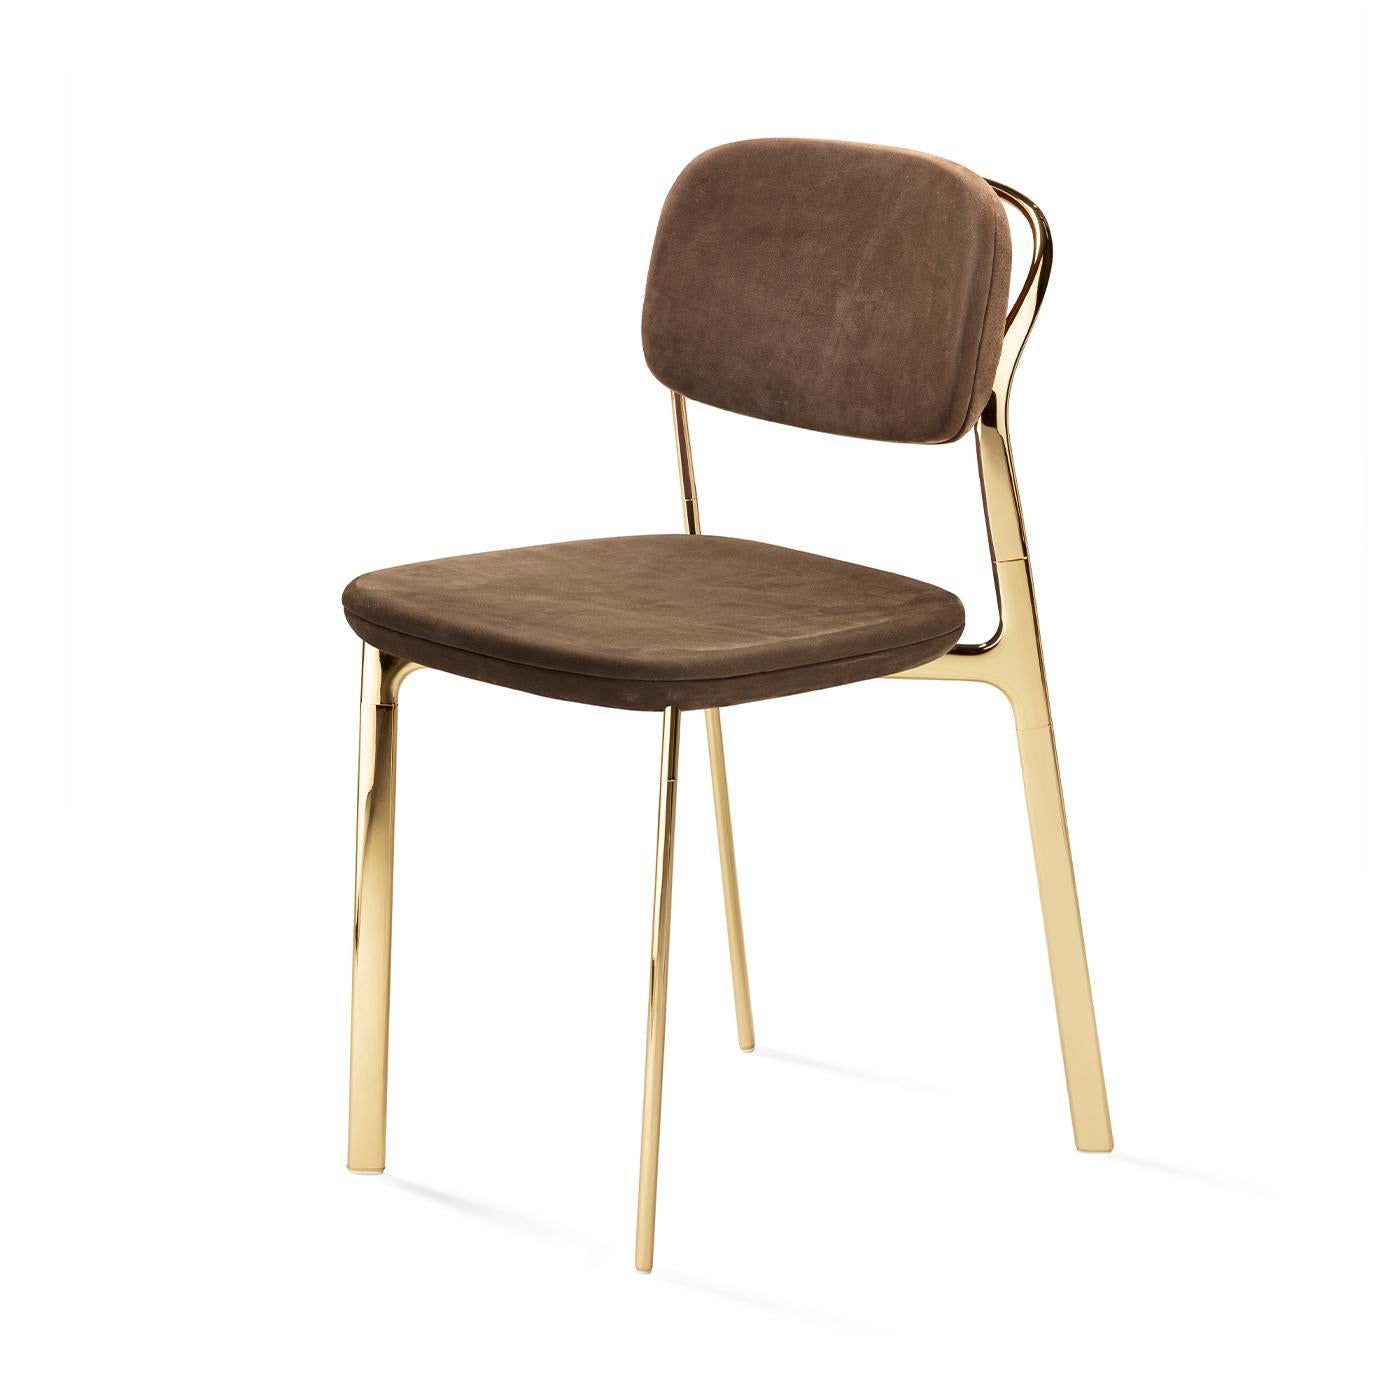 An elegant and sophisticated combination of hues and materials, this splendid chair is entirely fashioned of polished gold-finished brass, enriched with a soft brown Nabuk leather upholstery covering the rounded seat and open backrest. This superb